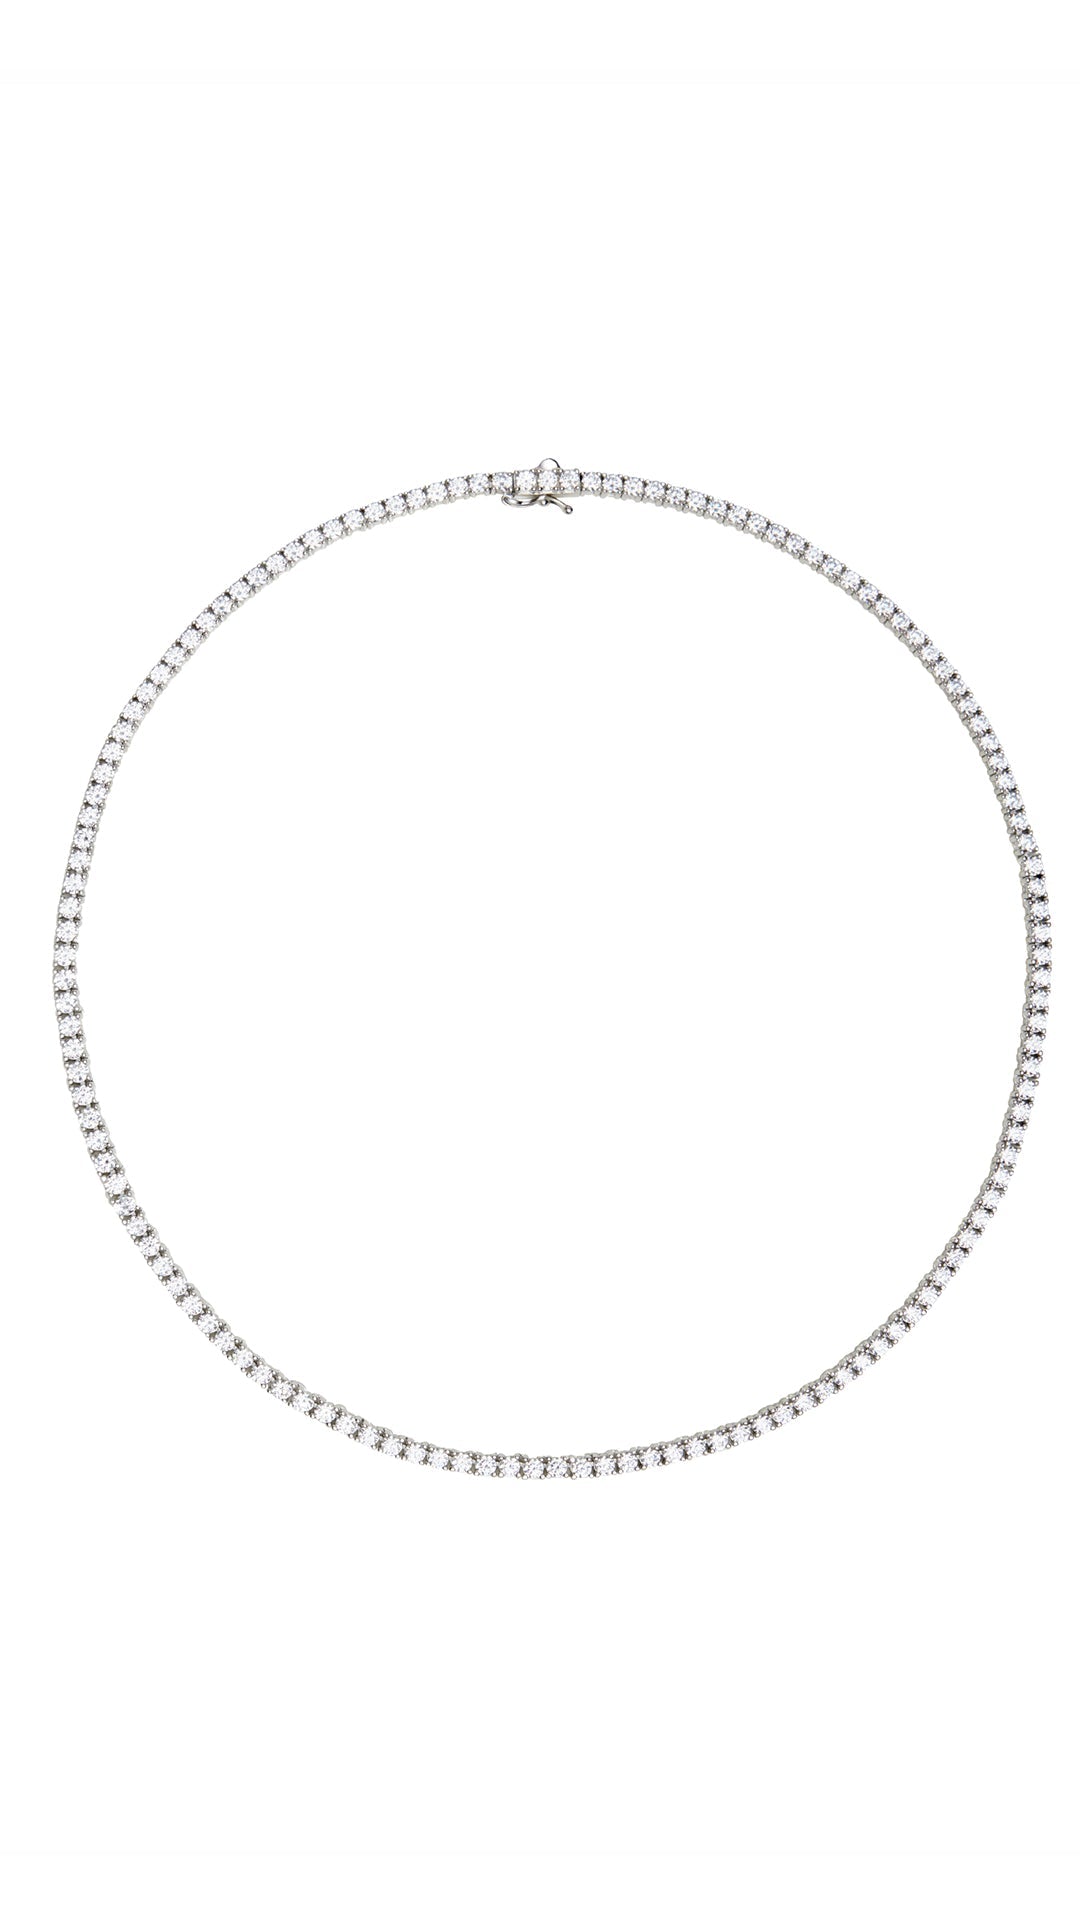 Prudence Necklace White Gold Plated